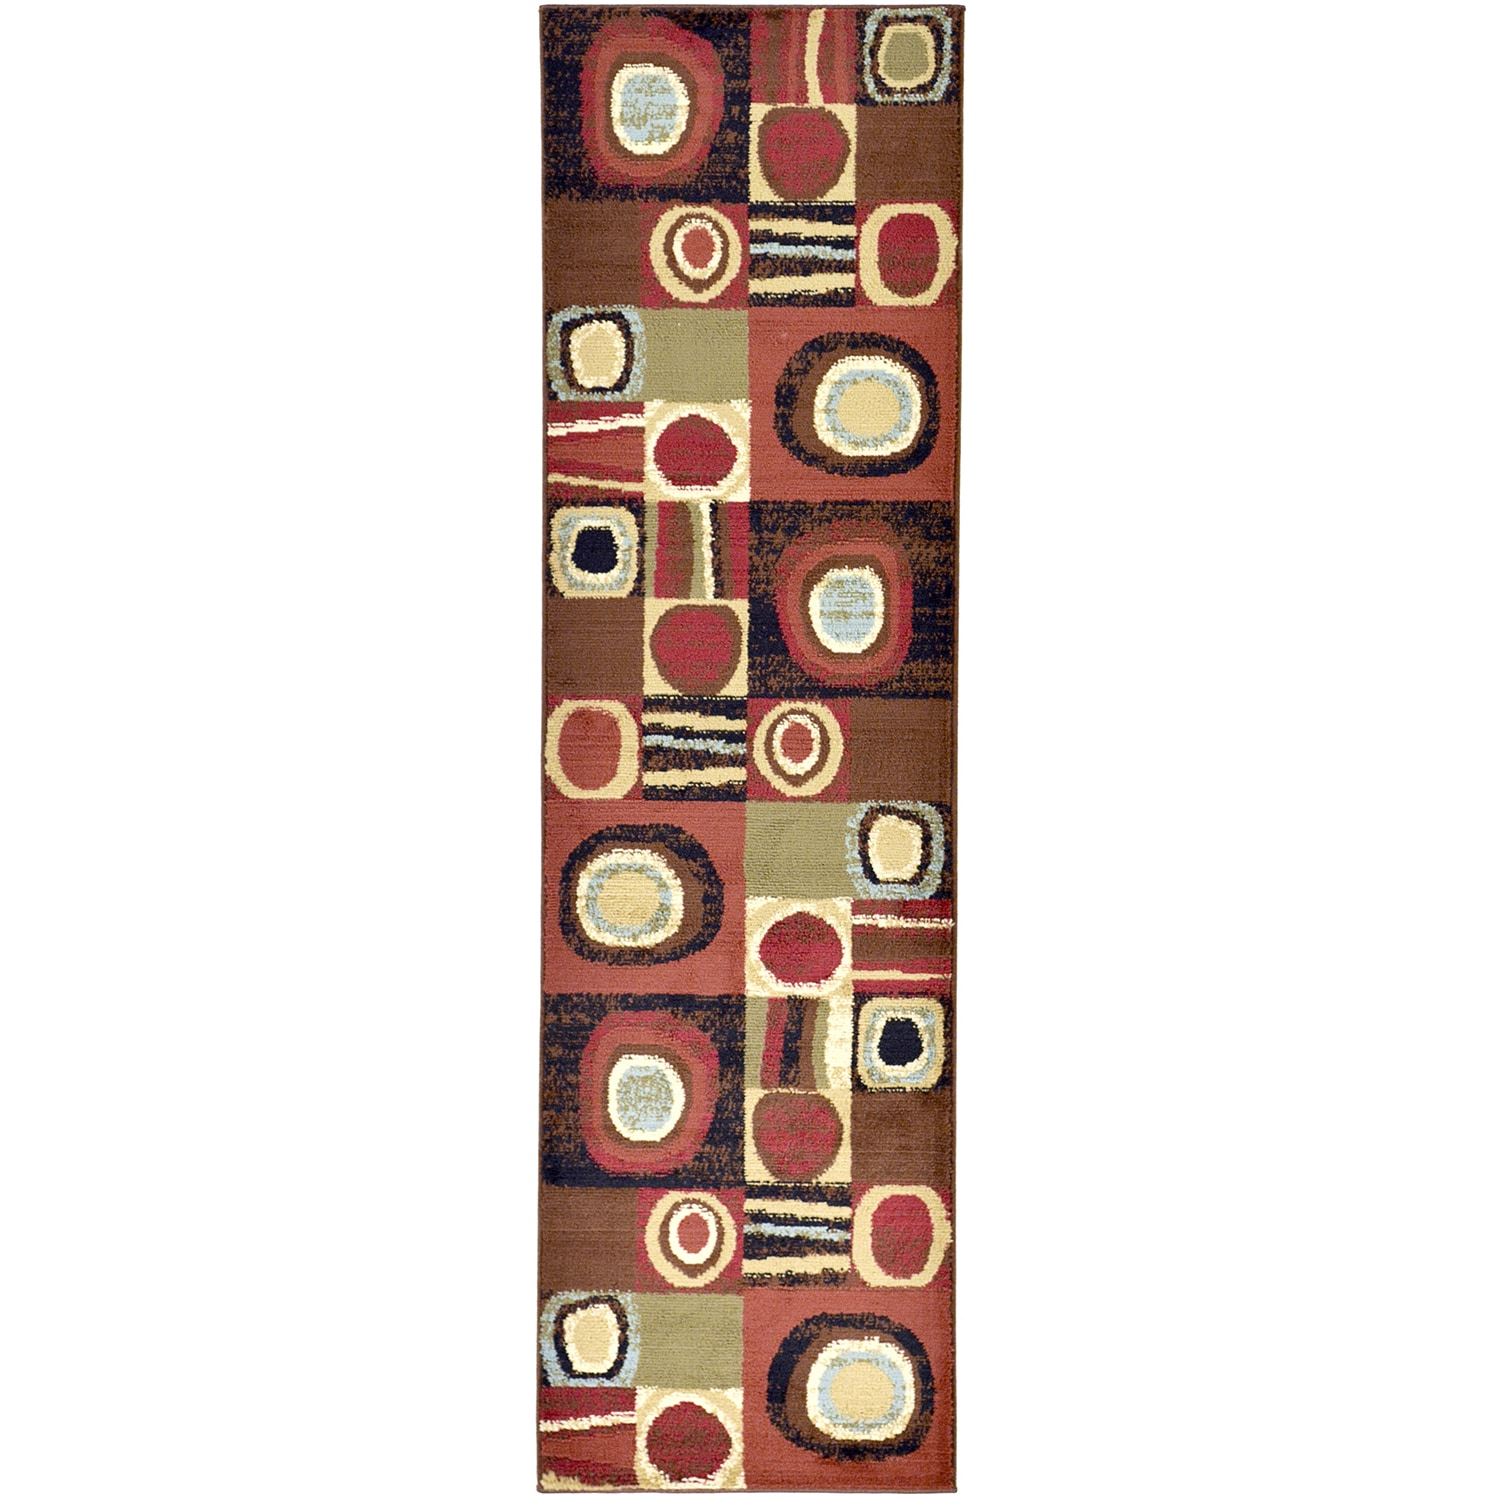 Multi color Contemporary Abstract Design Runner Rug (2x7)